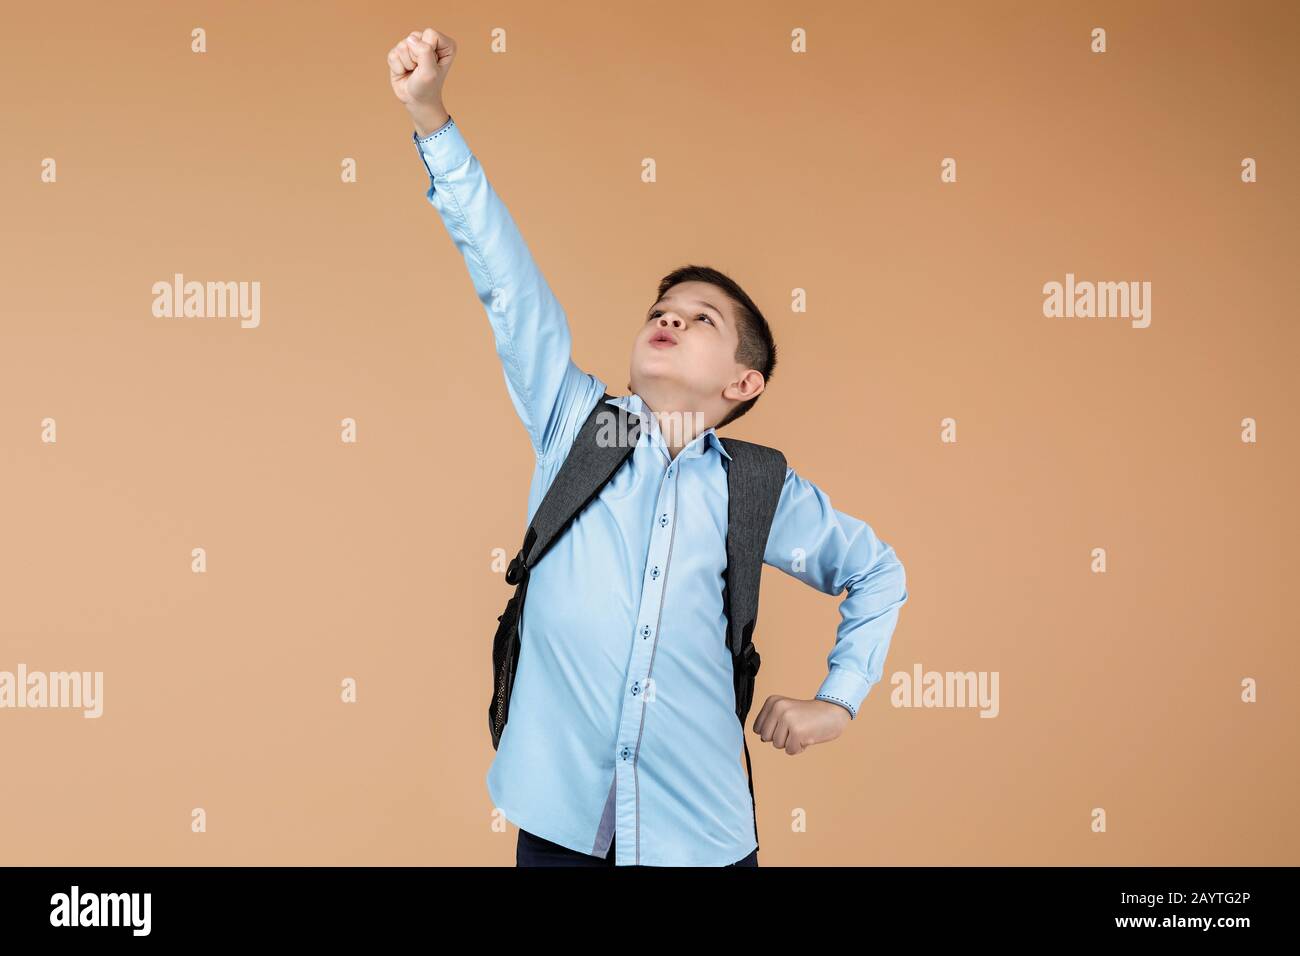 little cute school boy with backpack in superhero pose over yellow background. child ready to save the world. kid clenches his fist Stock Photo